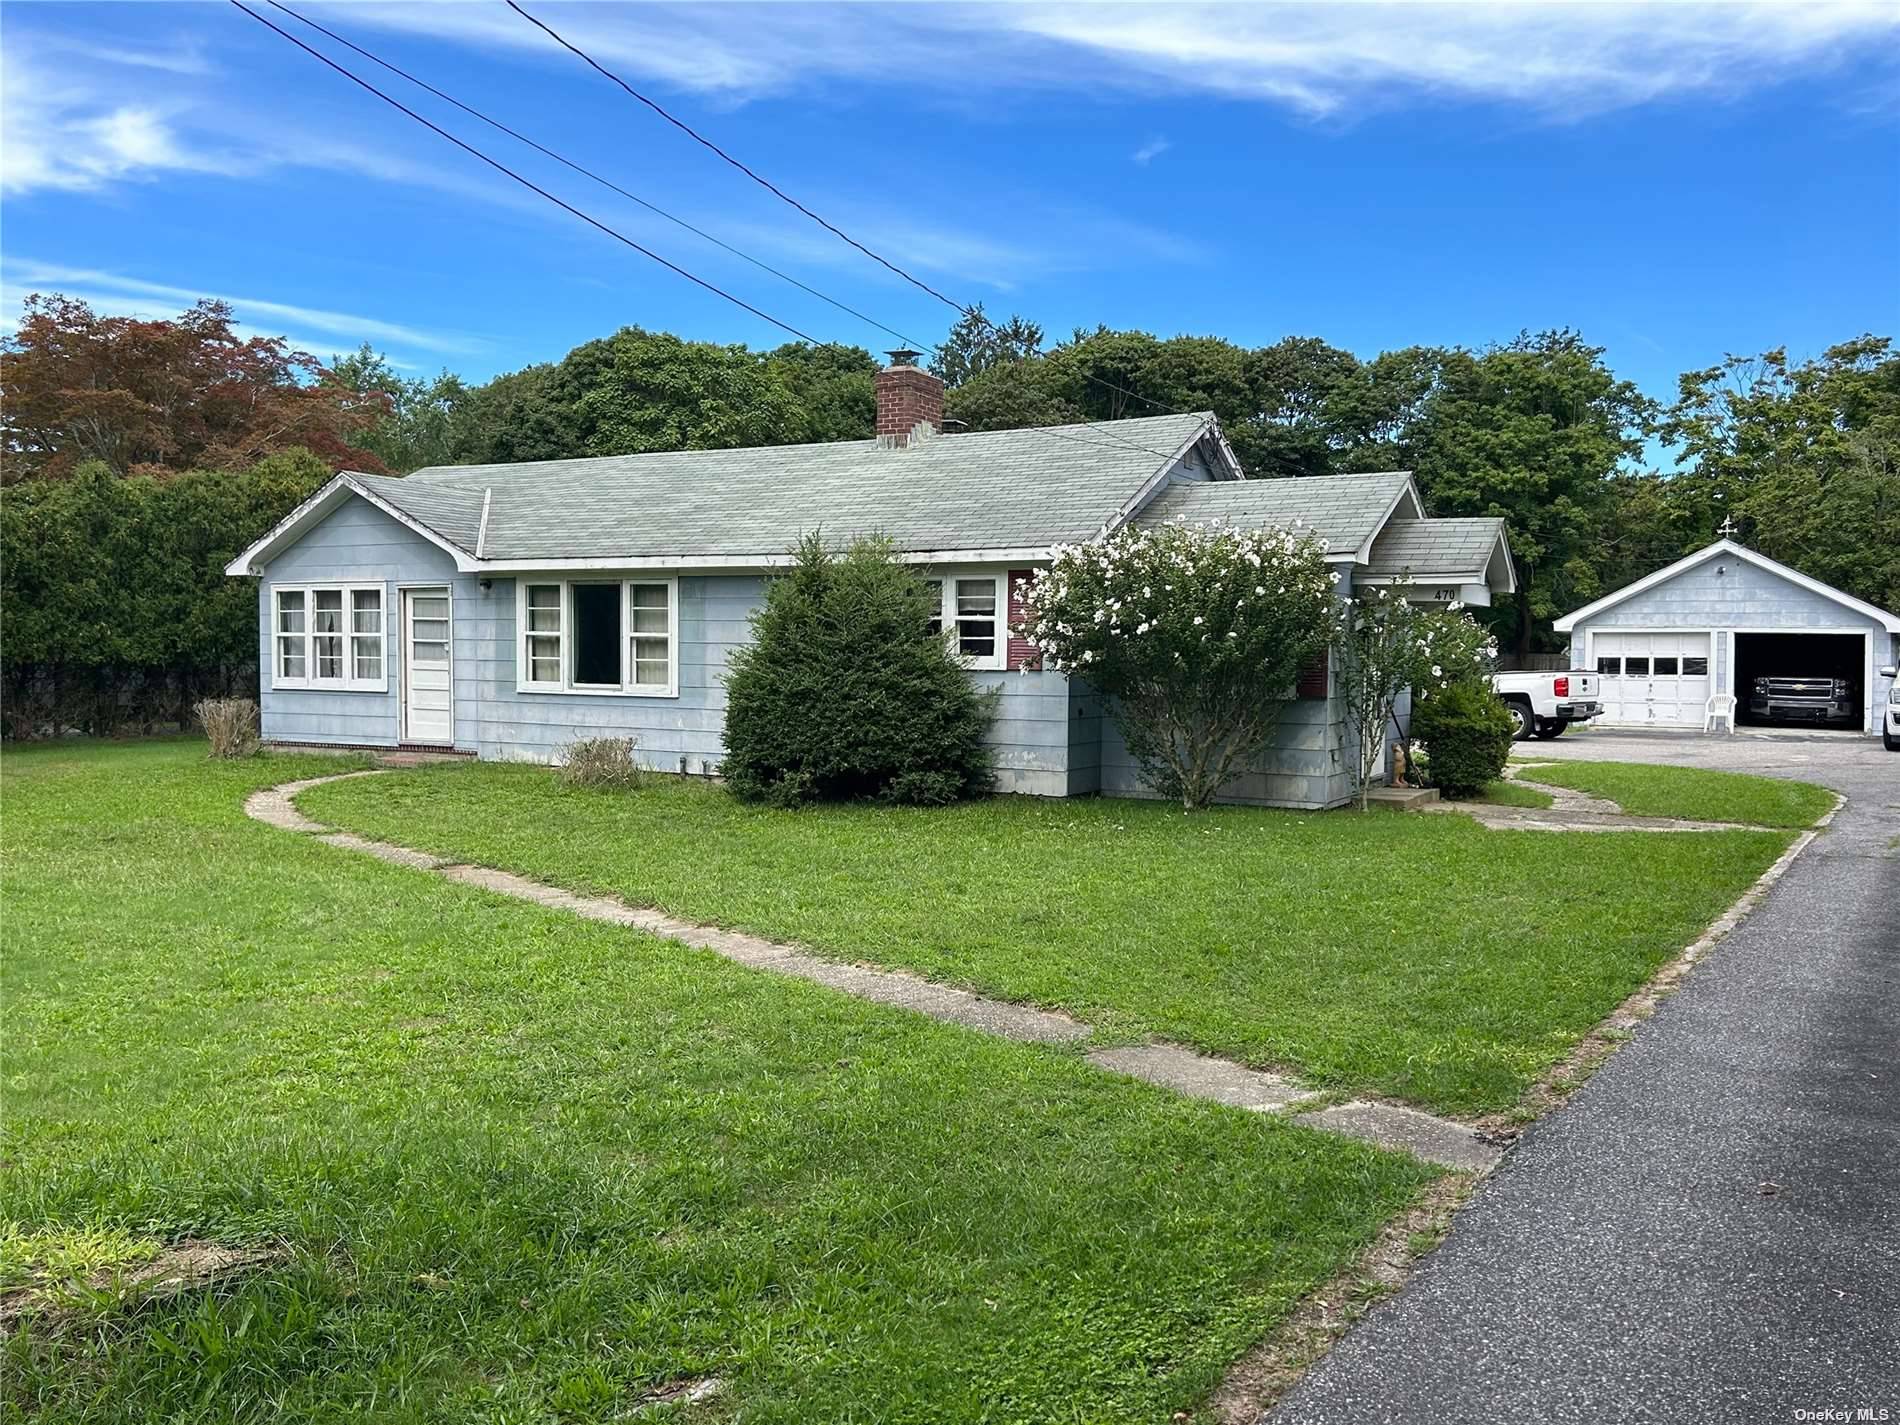 2 Bedroom, 2 bath Ranch, Close to the Westhampton Beach Village Shops and great Restaurants.